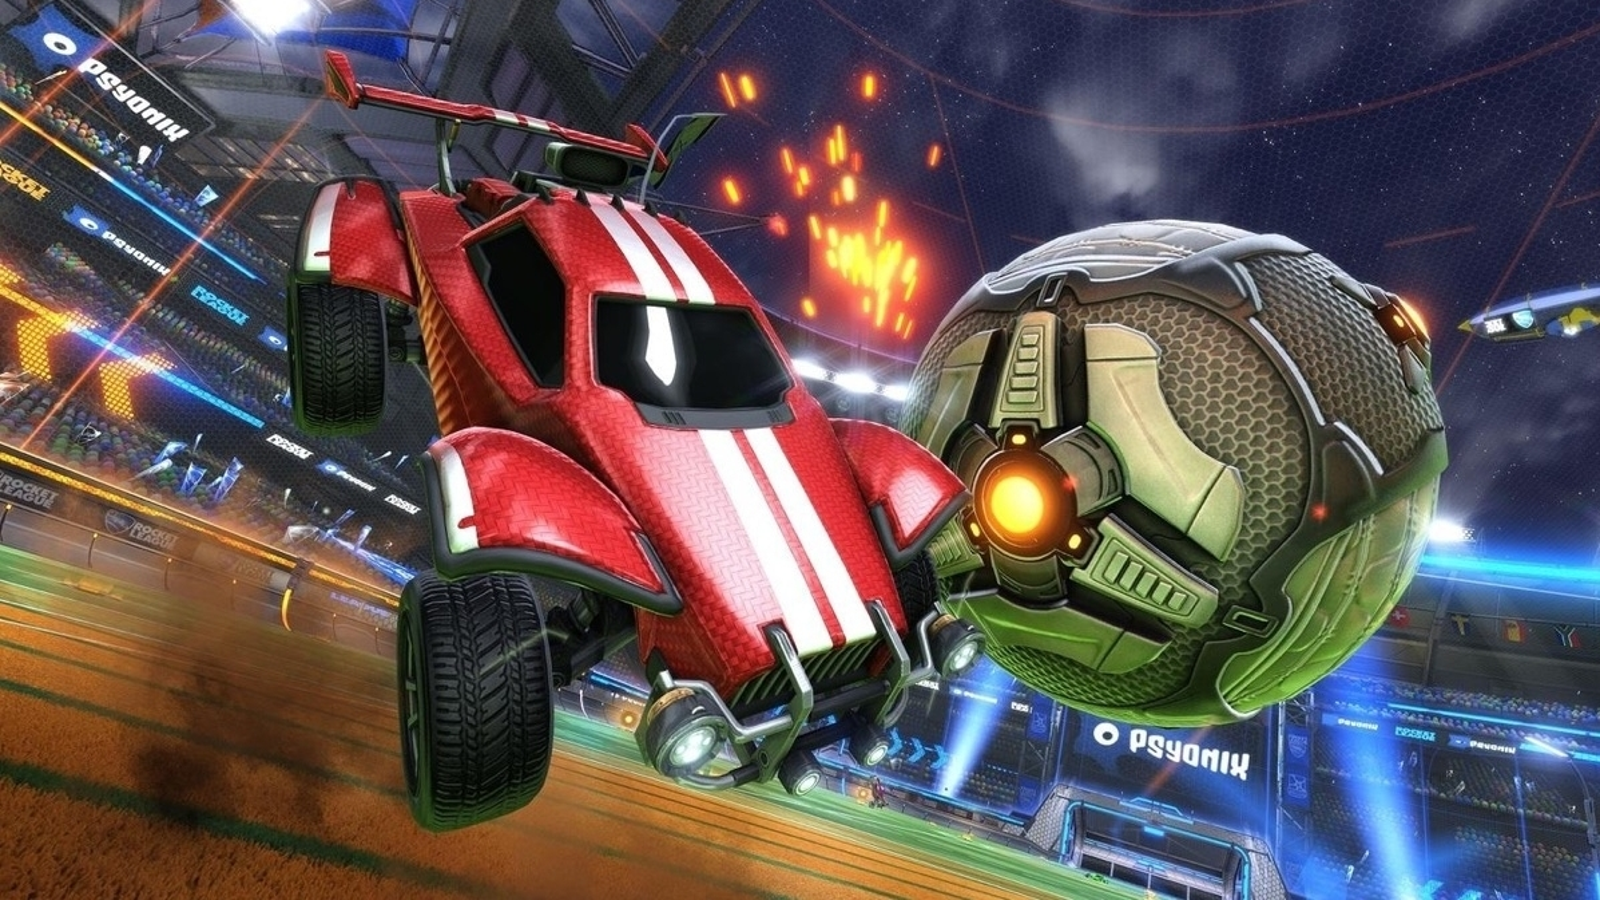 Rocket League Review – PC/PS4 – Game Chronicles